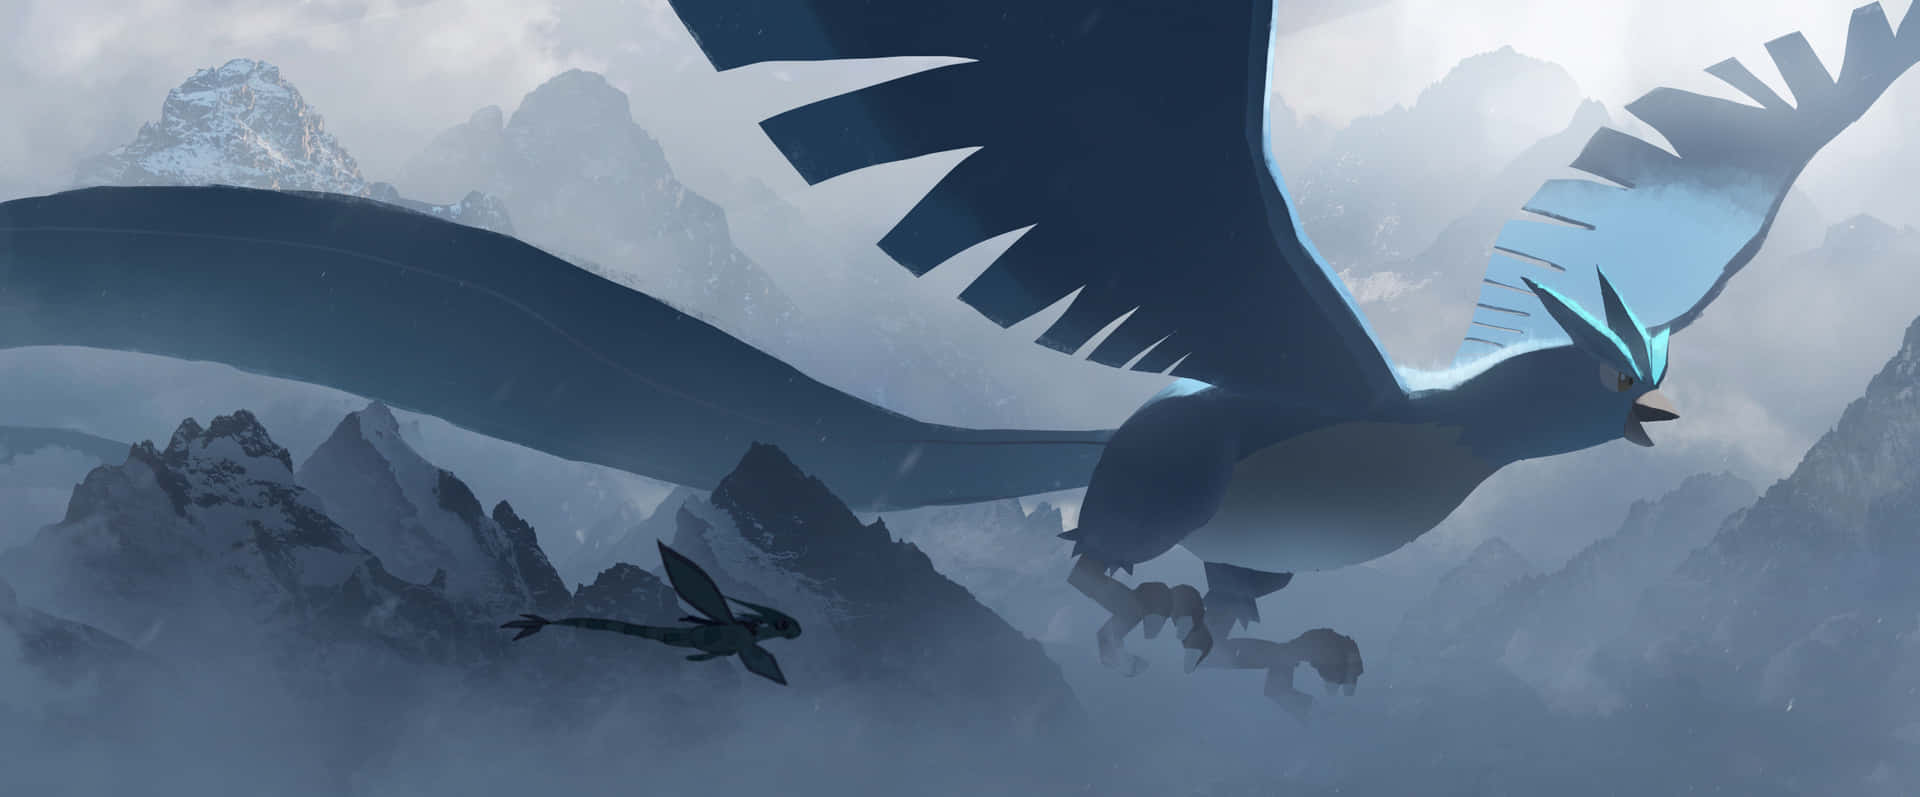 Articuno And Silhouette Of Flygon Wallpaper